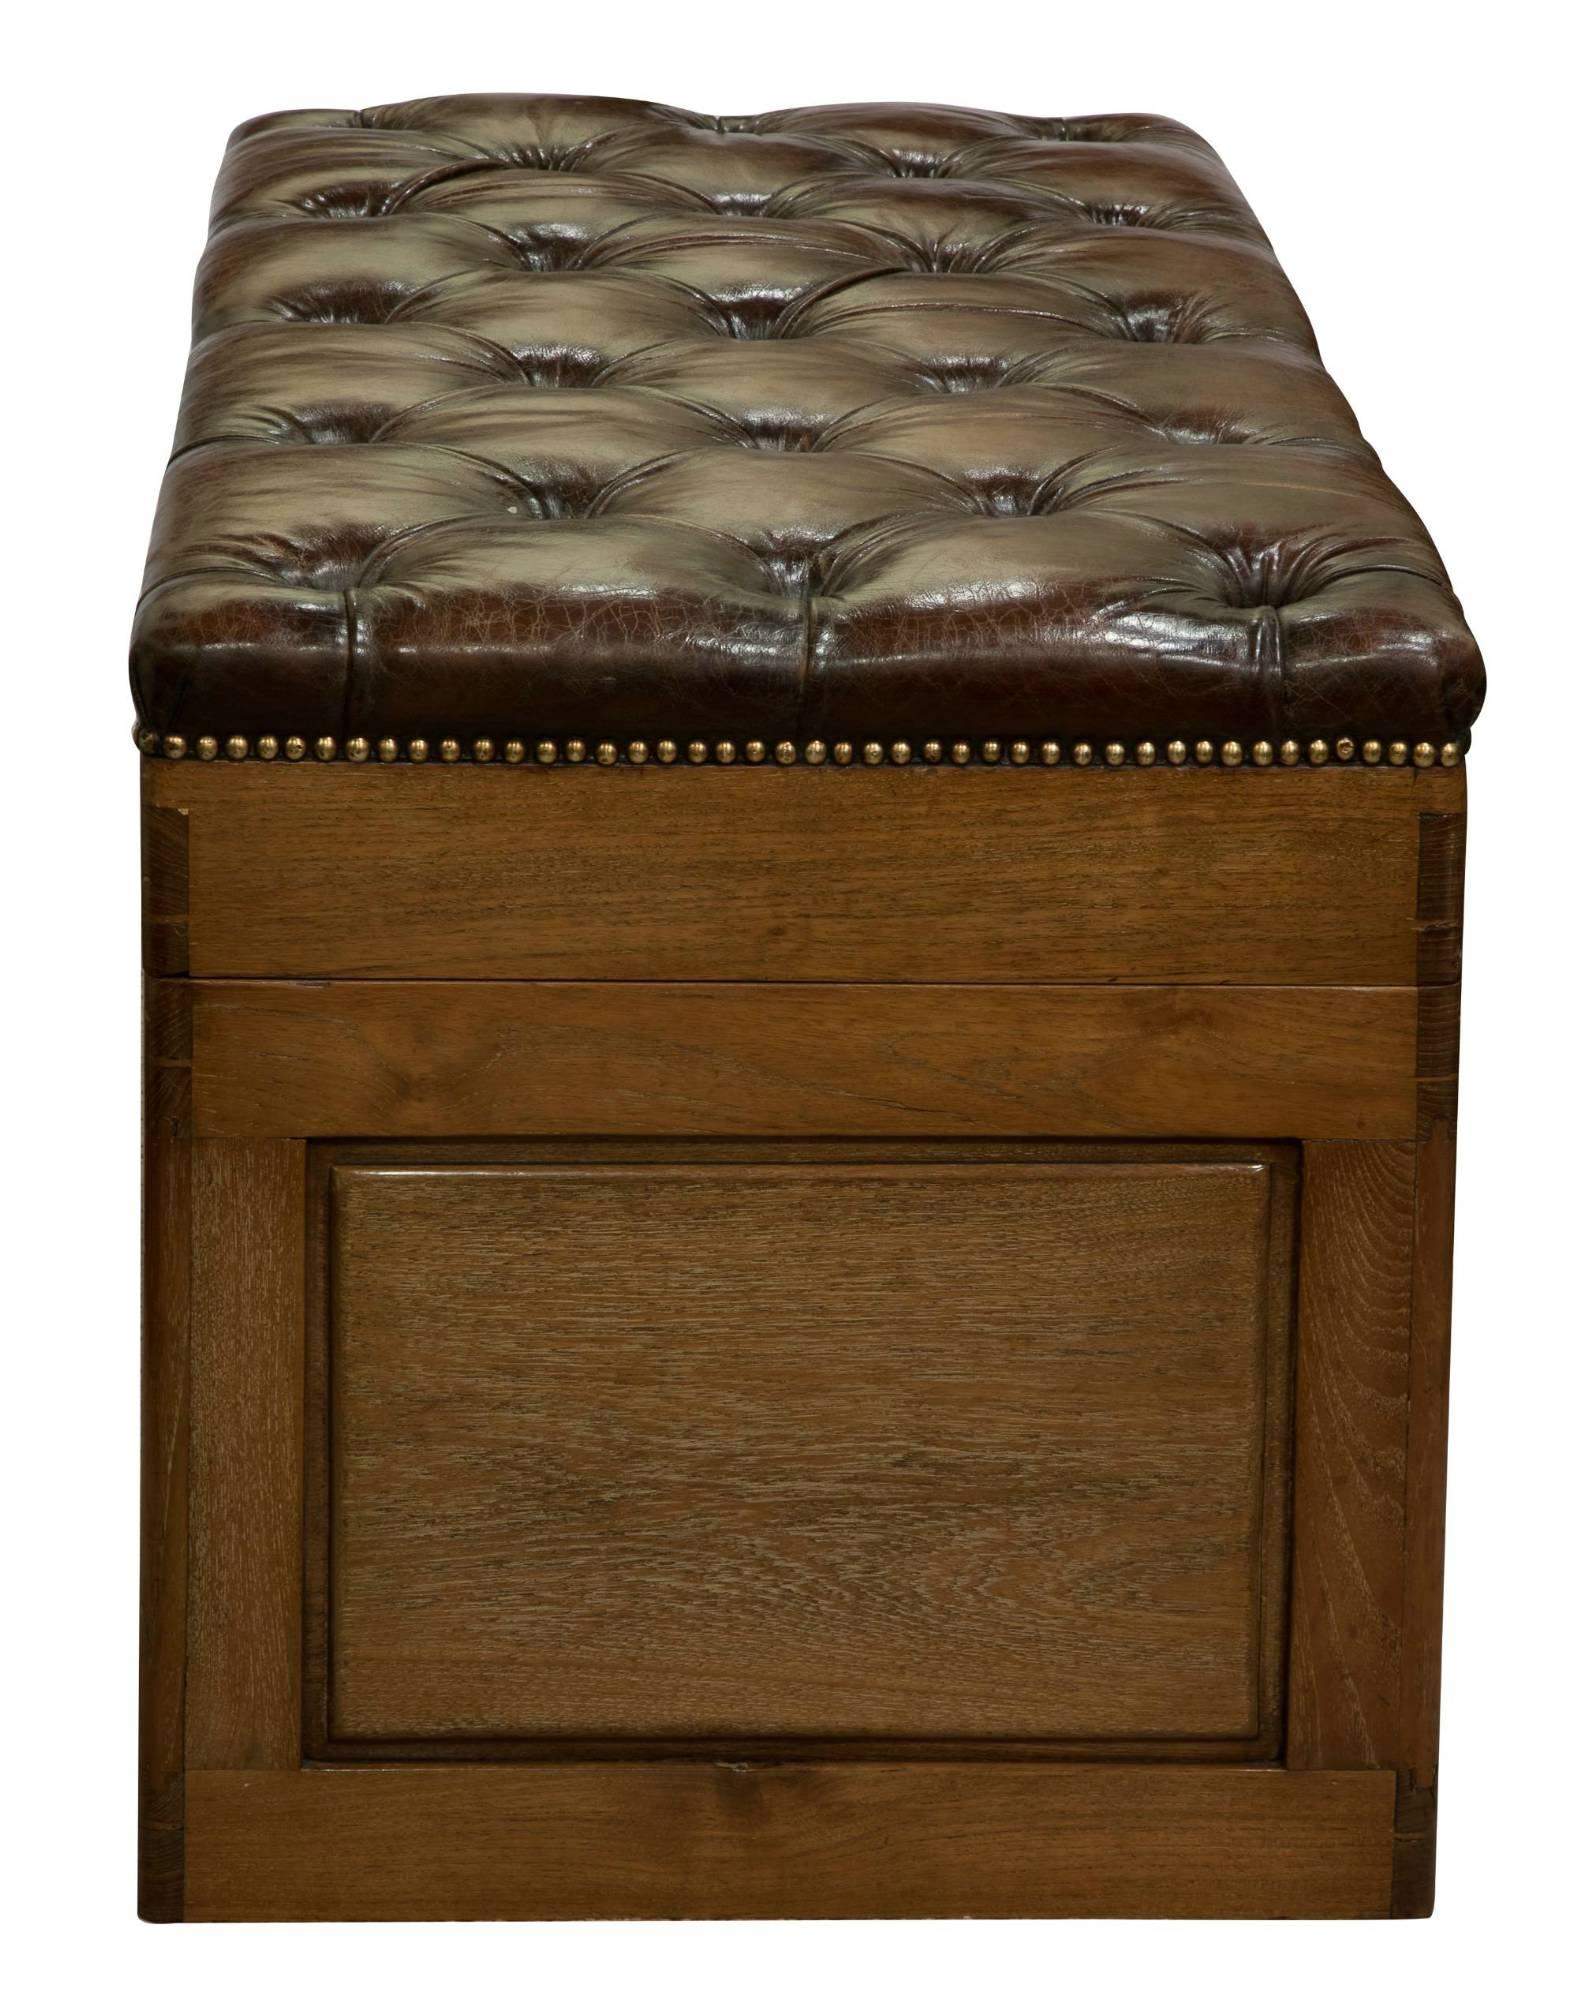 Camphorwood trunk with deep button leather top.